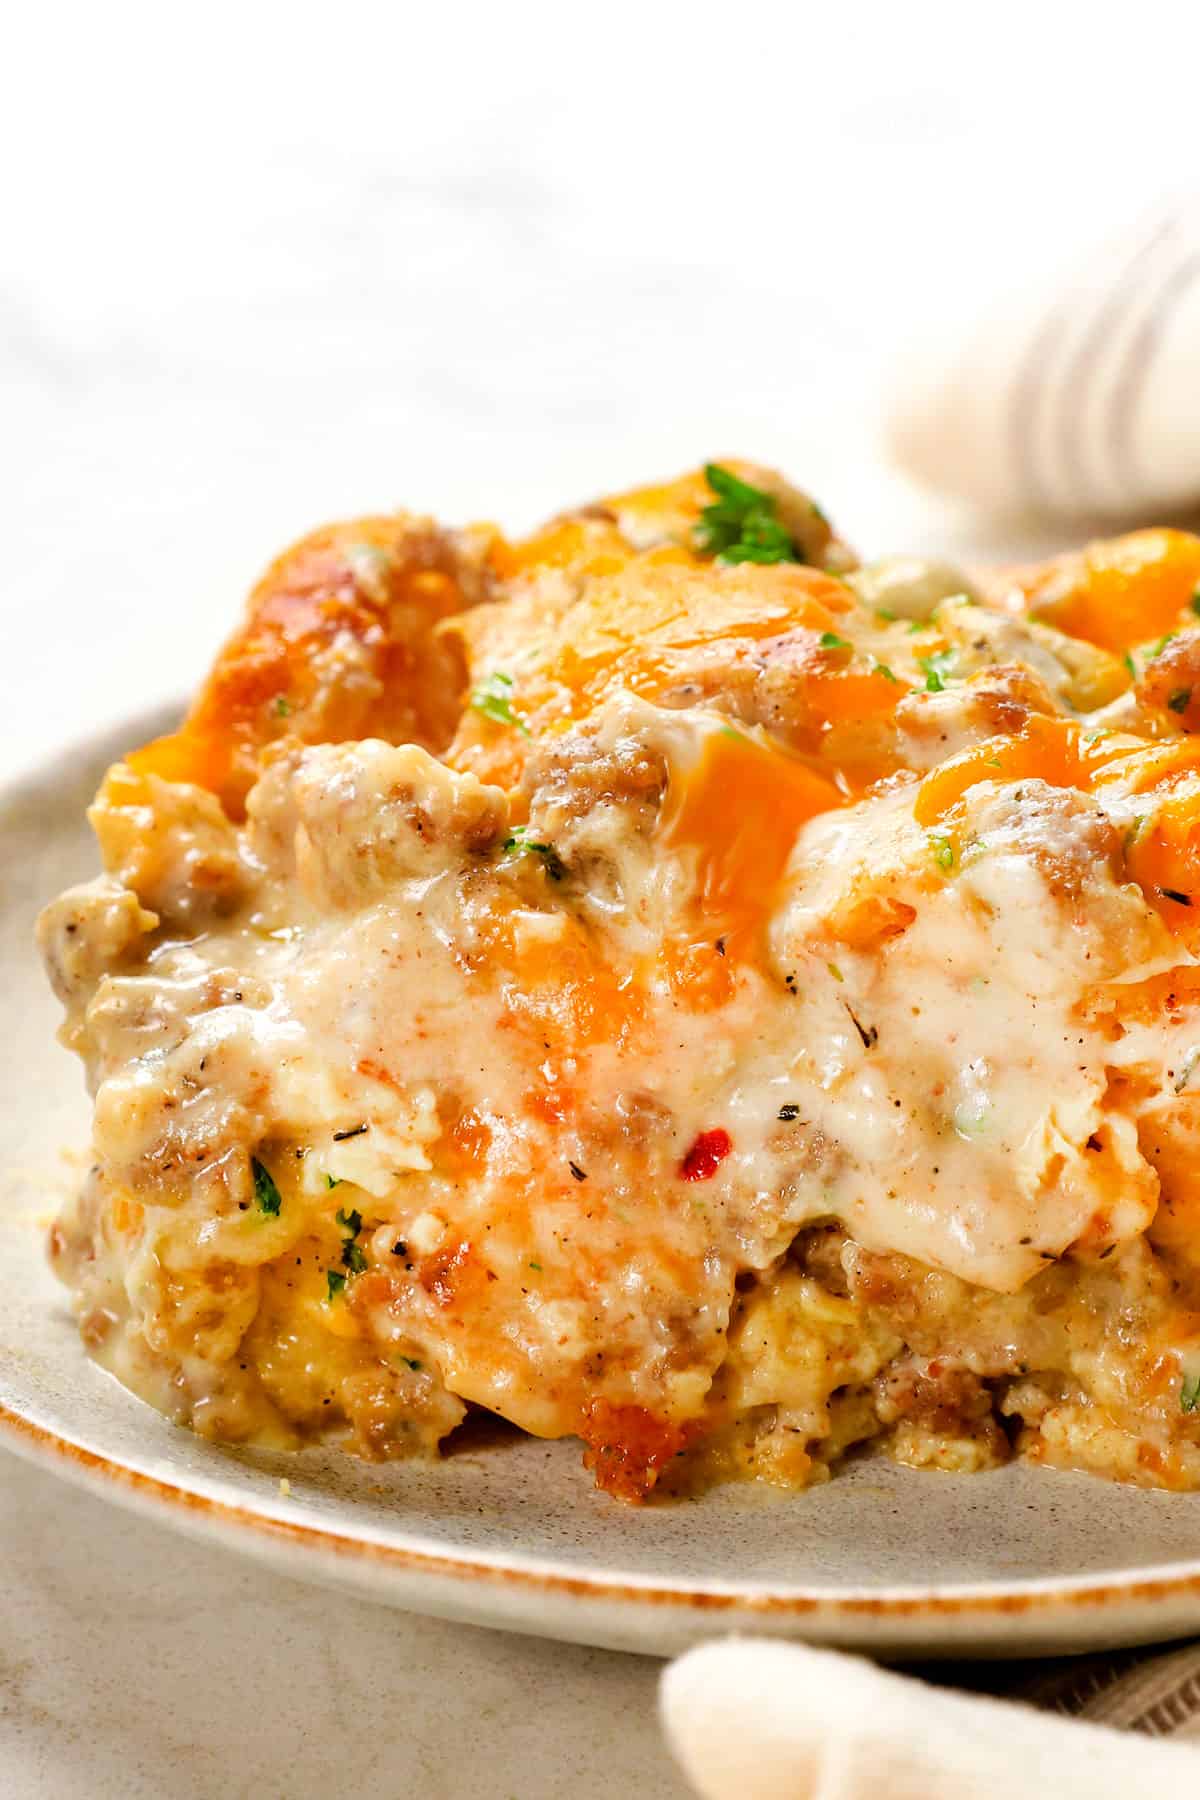 up close of a slice of sausage gravy casserole showing how creamy and cheesy it is